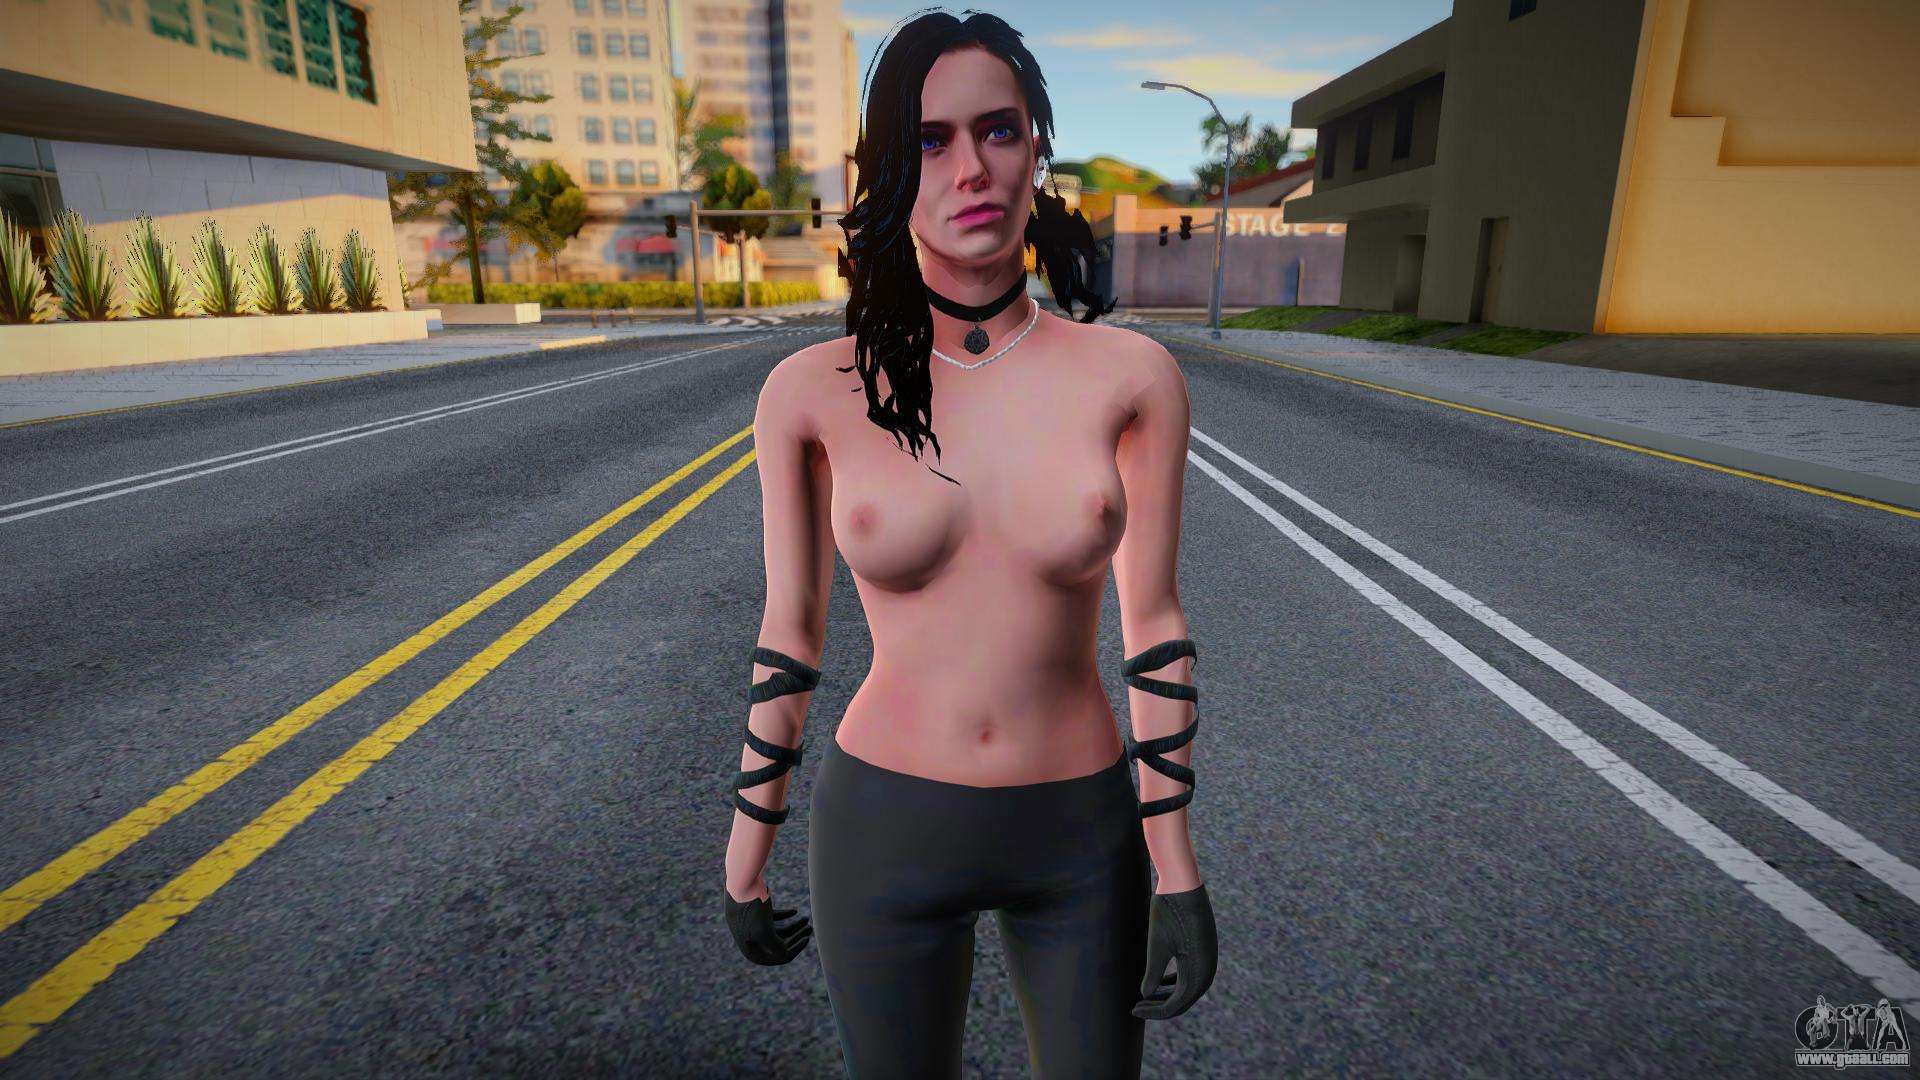 clancy smith recommends naked women in gta pic